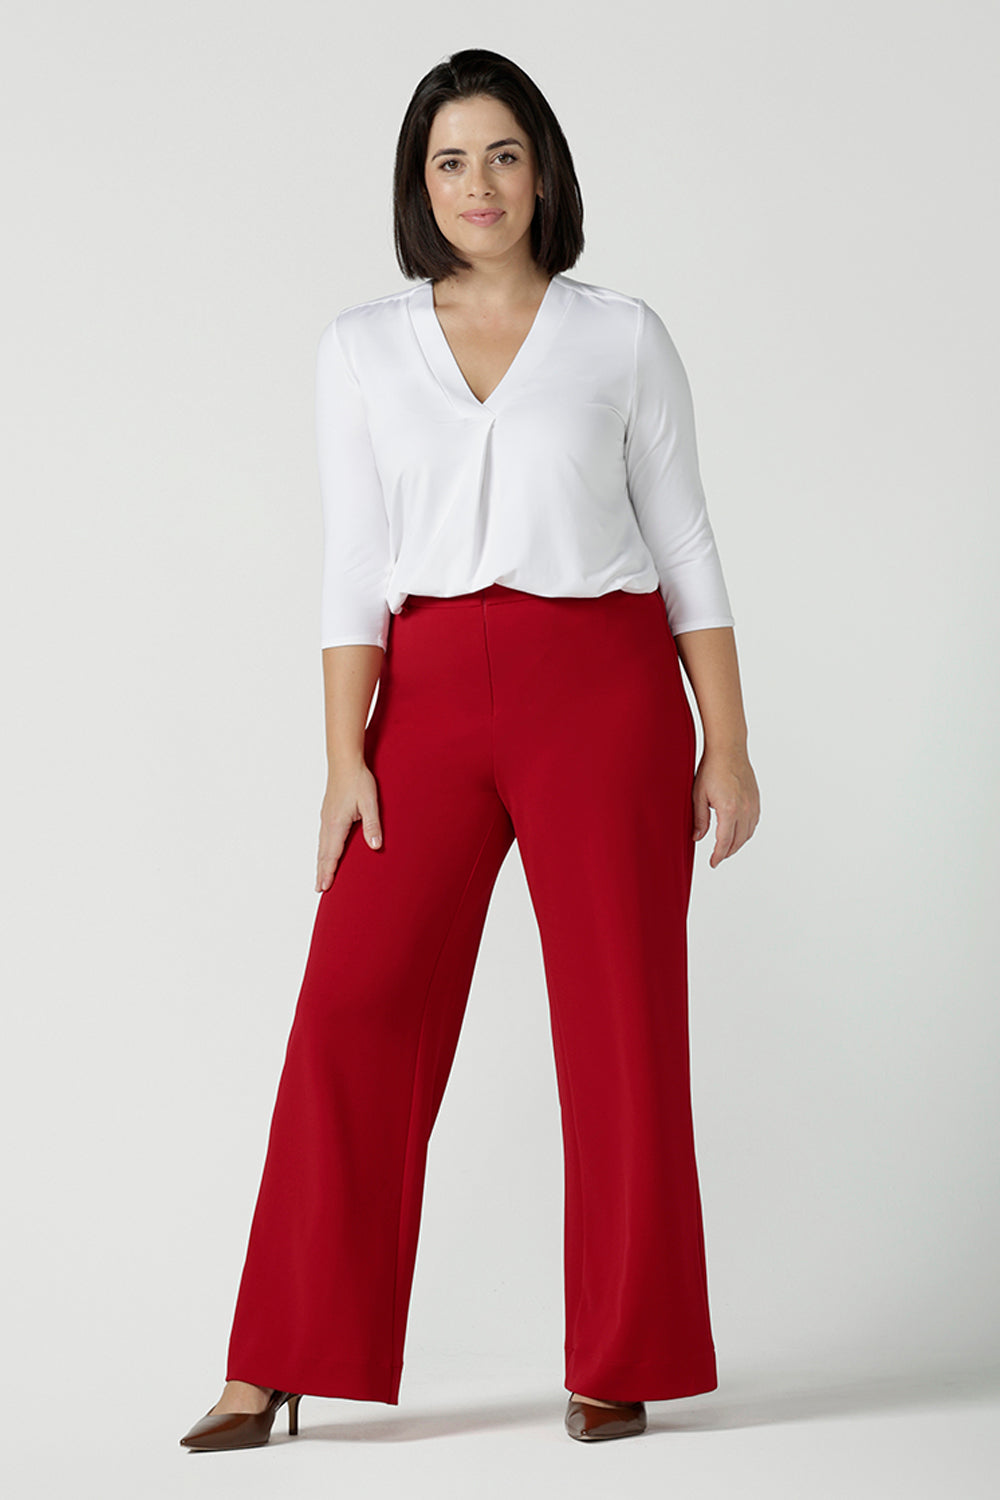 A size 10 woman wears the Drew pant in red, high waist and invisible fly front. Tailored belt loops and wide leg. Made in Australia for women. Stylish corporate wear for women. Made in Australia size 8 - 24.